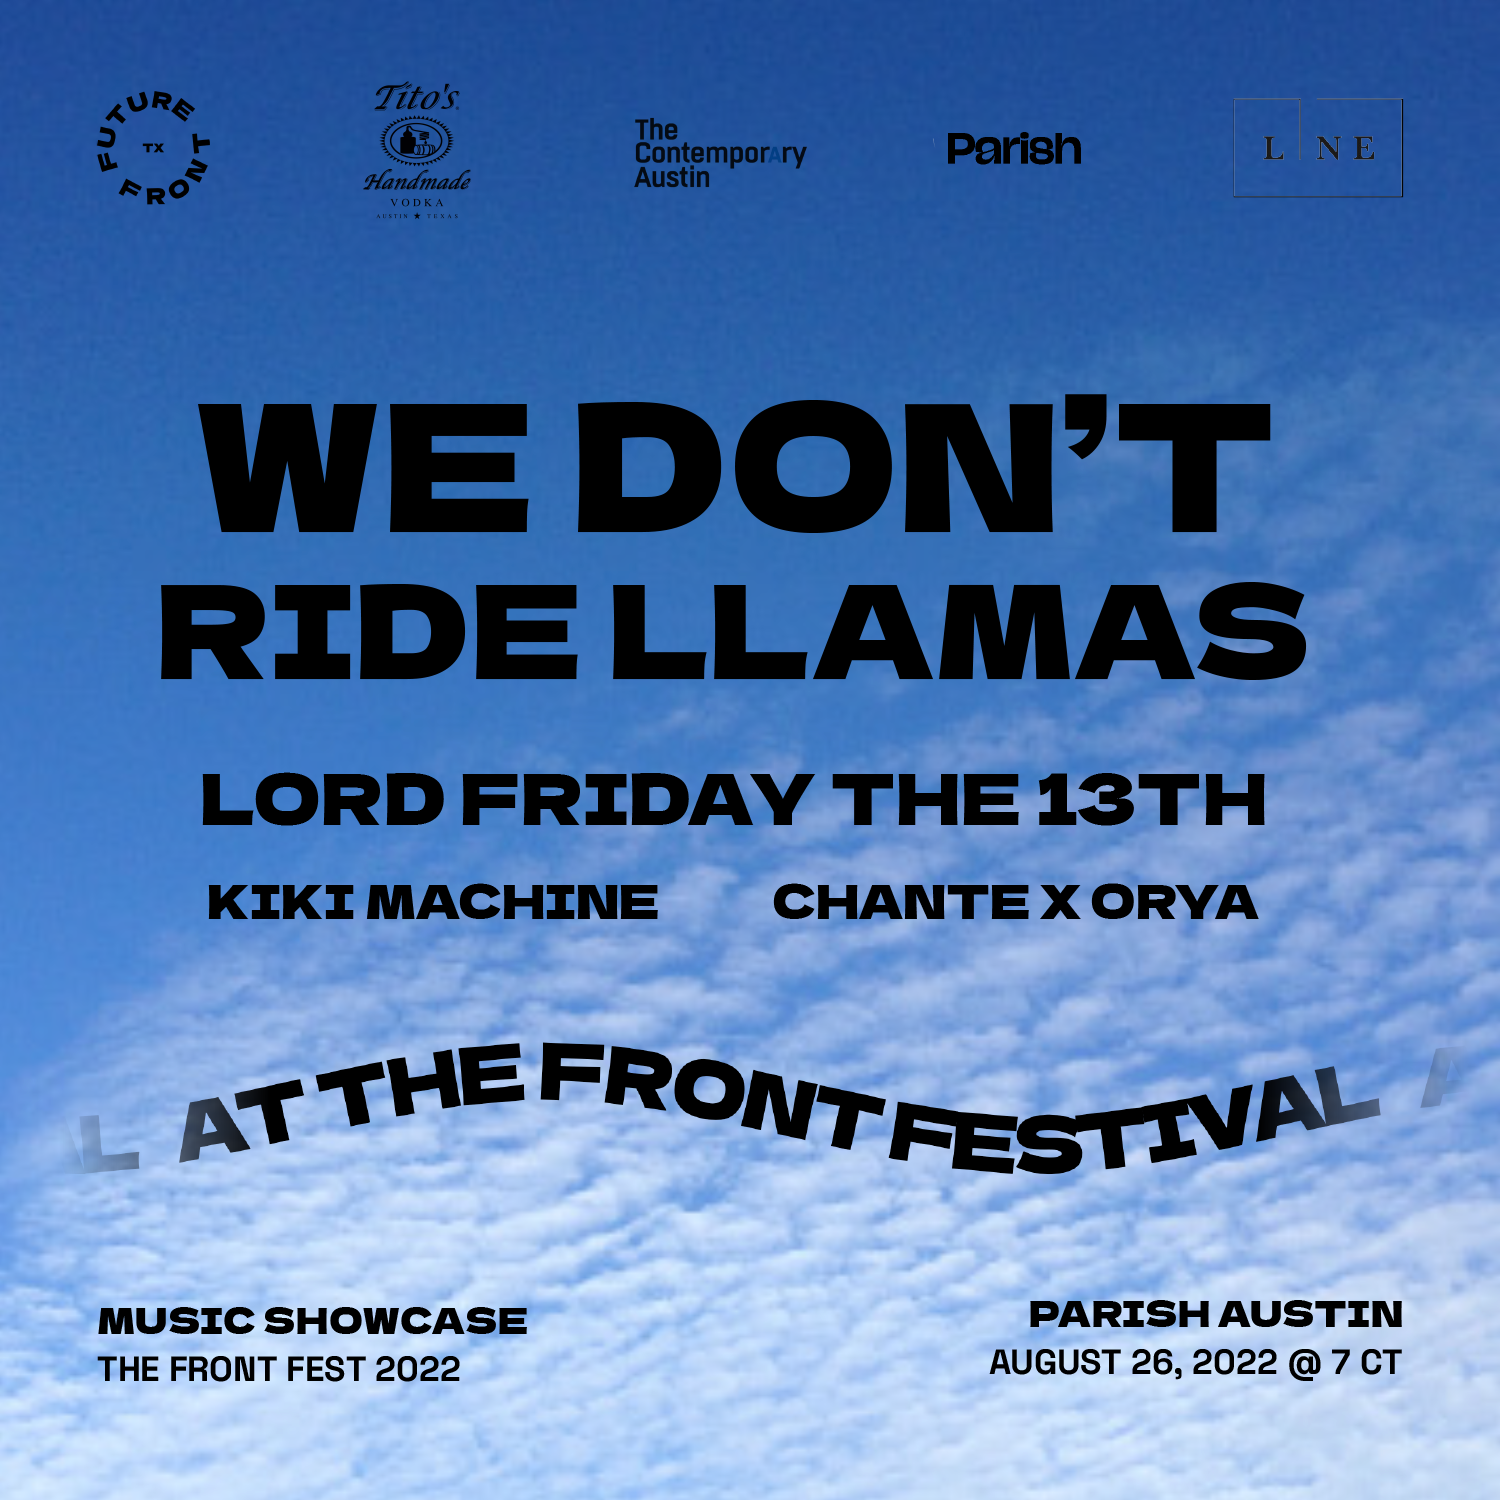 thefrontfest2022flyers-dailymusic-3.png